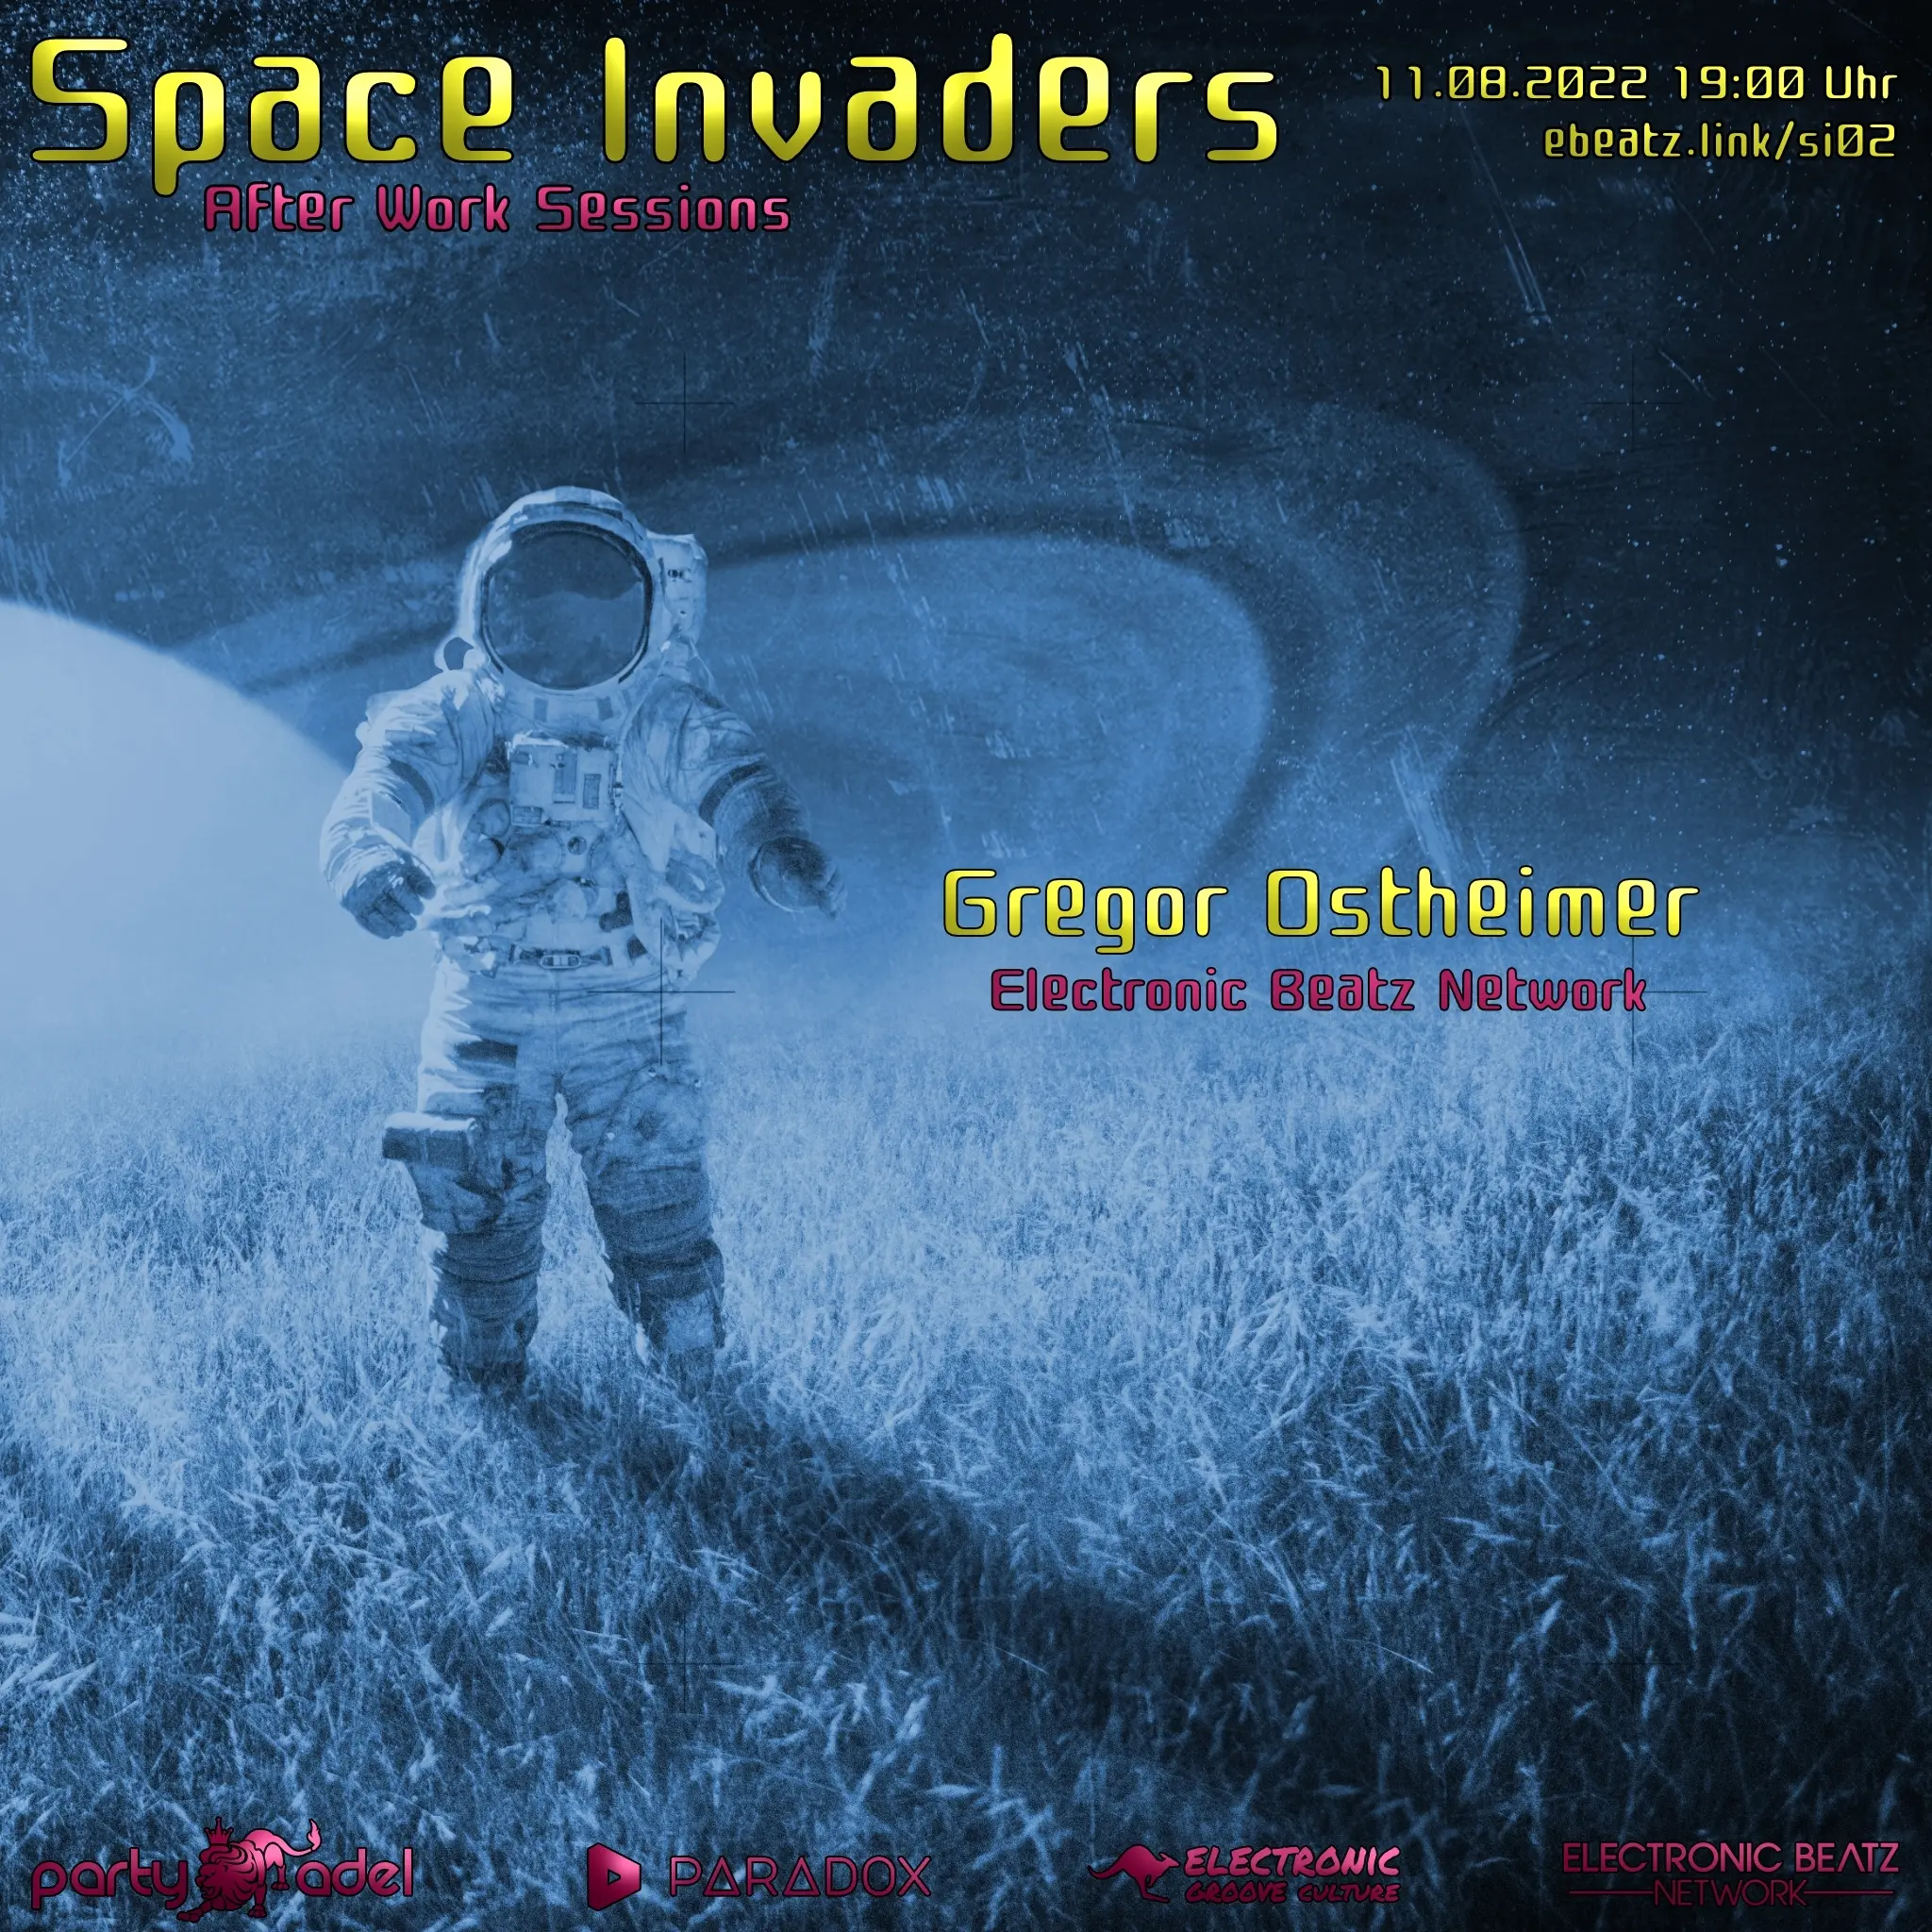 Space Invaders #2 (11.08.2022)